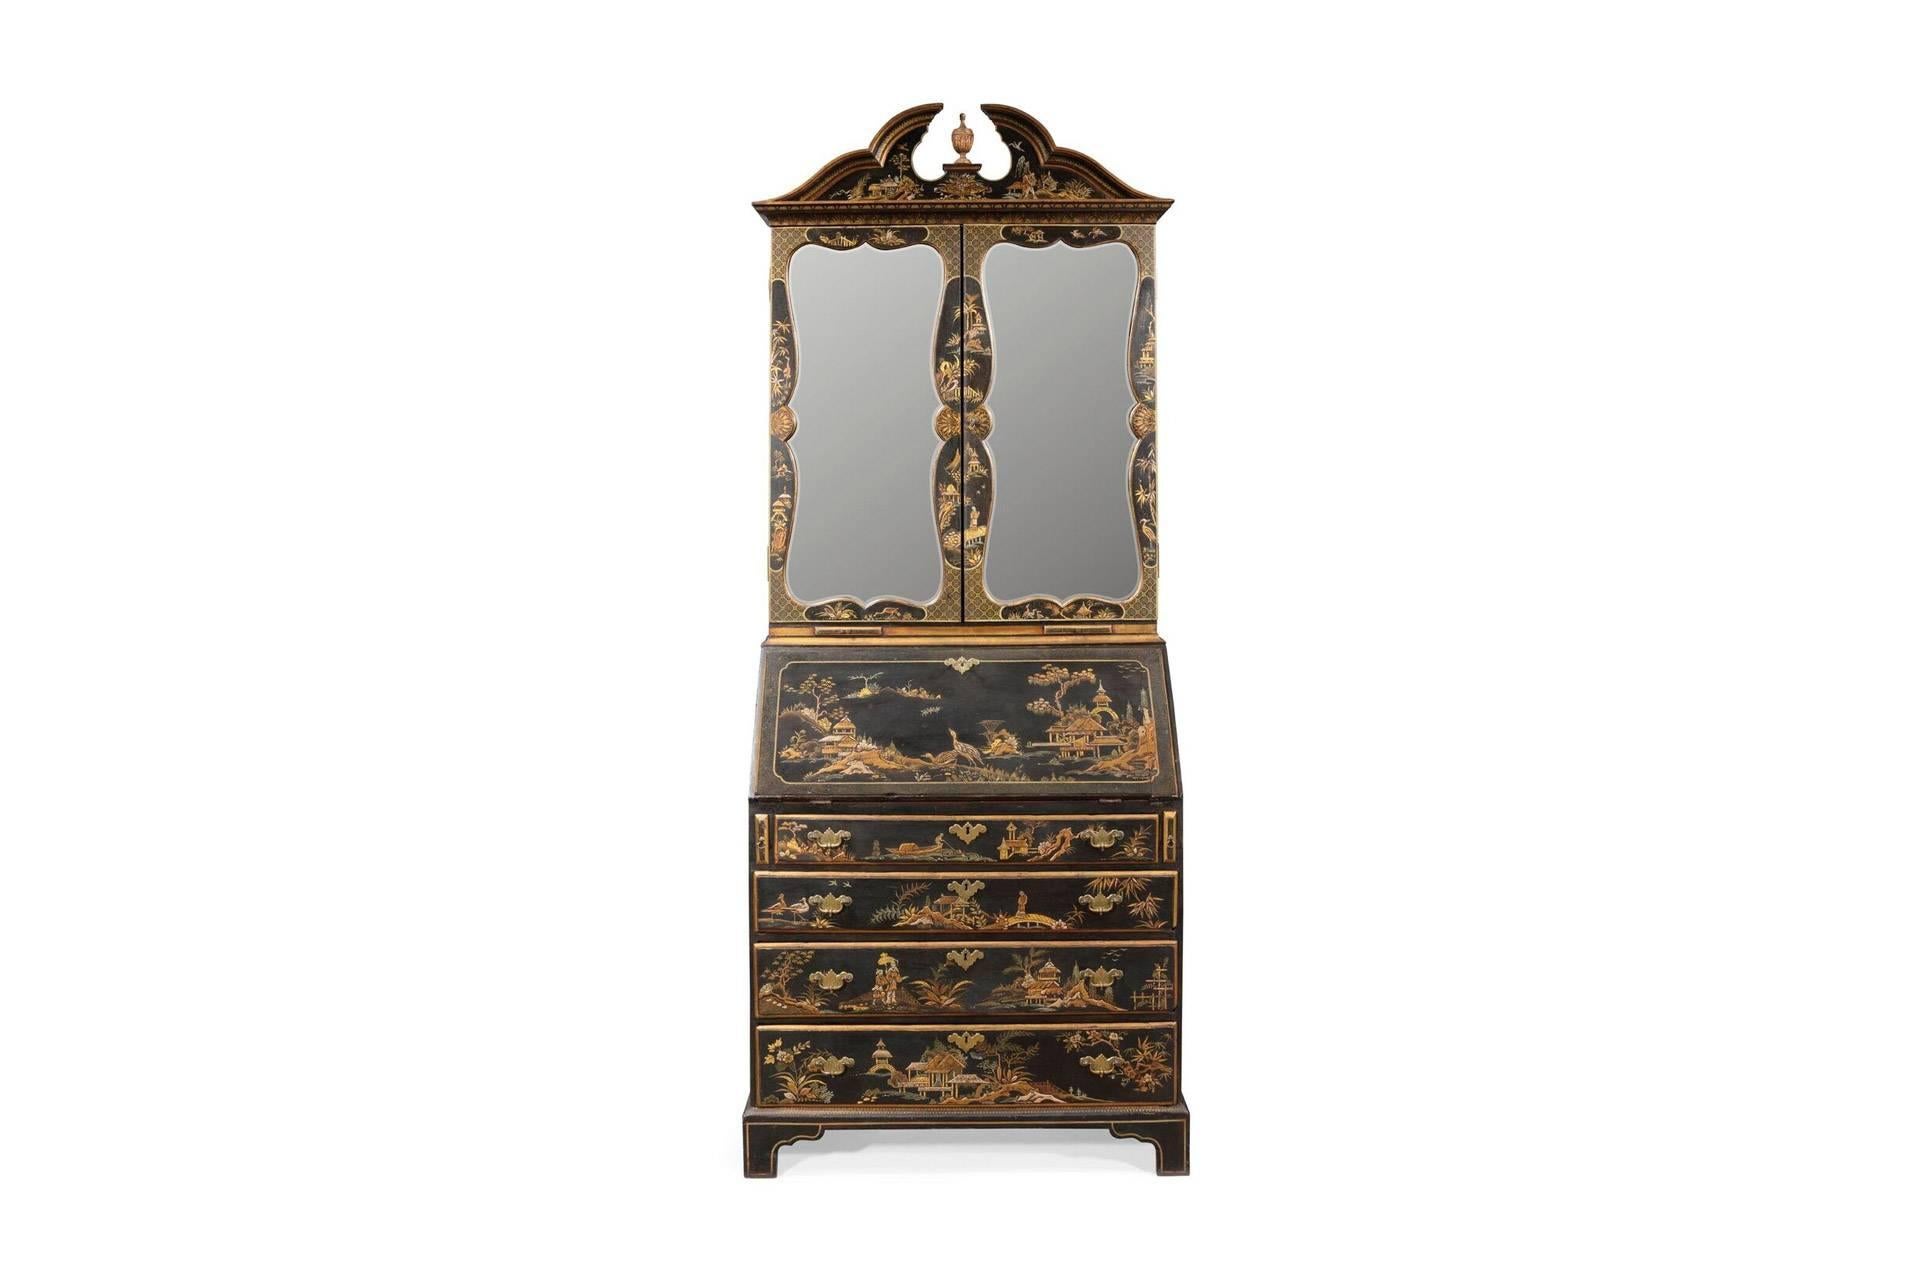 Incredible George III style cabinet with Chinese landscapes and figures painted in gold. Exterior lacquered in black. Interior in red lacquer with intrinsic oriental motives and ornaments hand-painted.
          